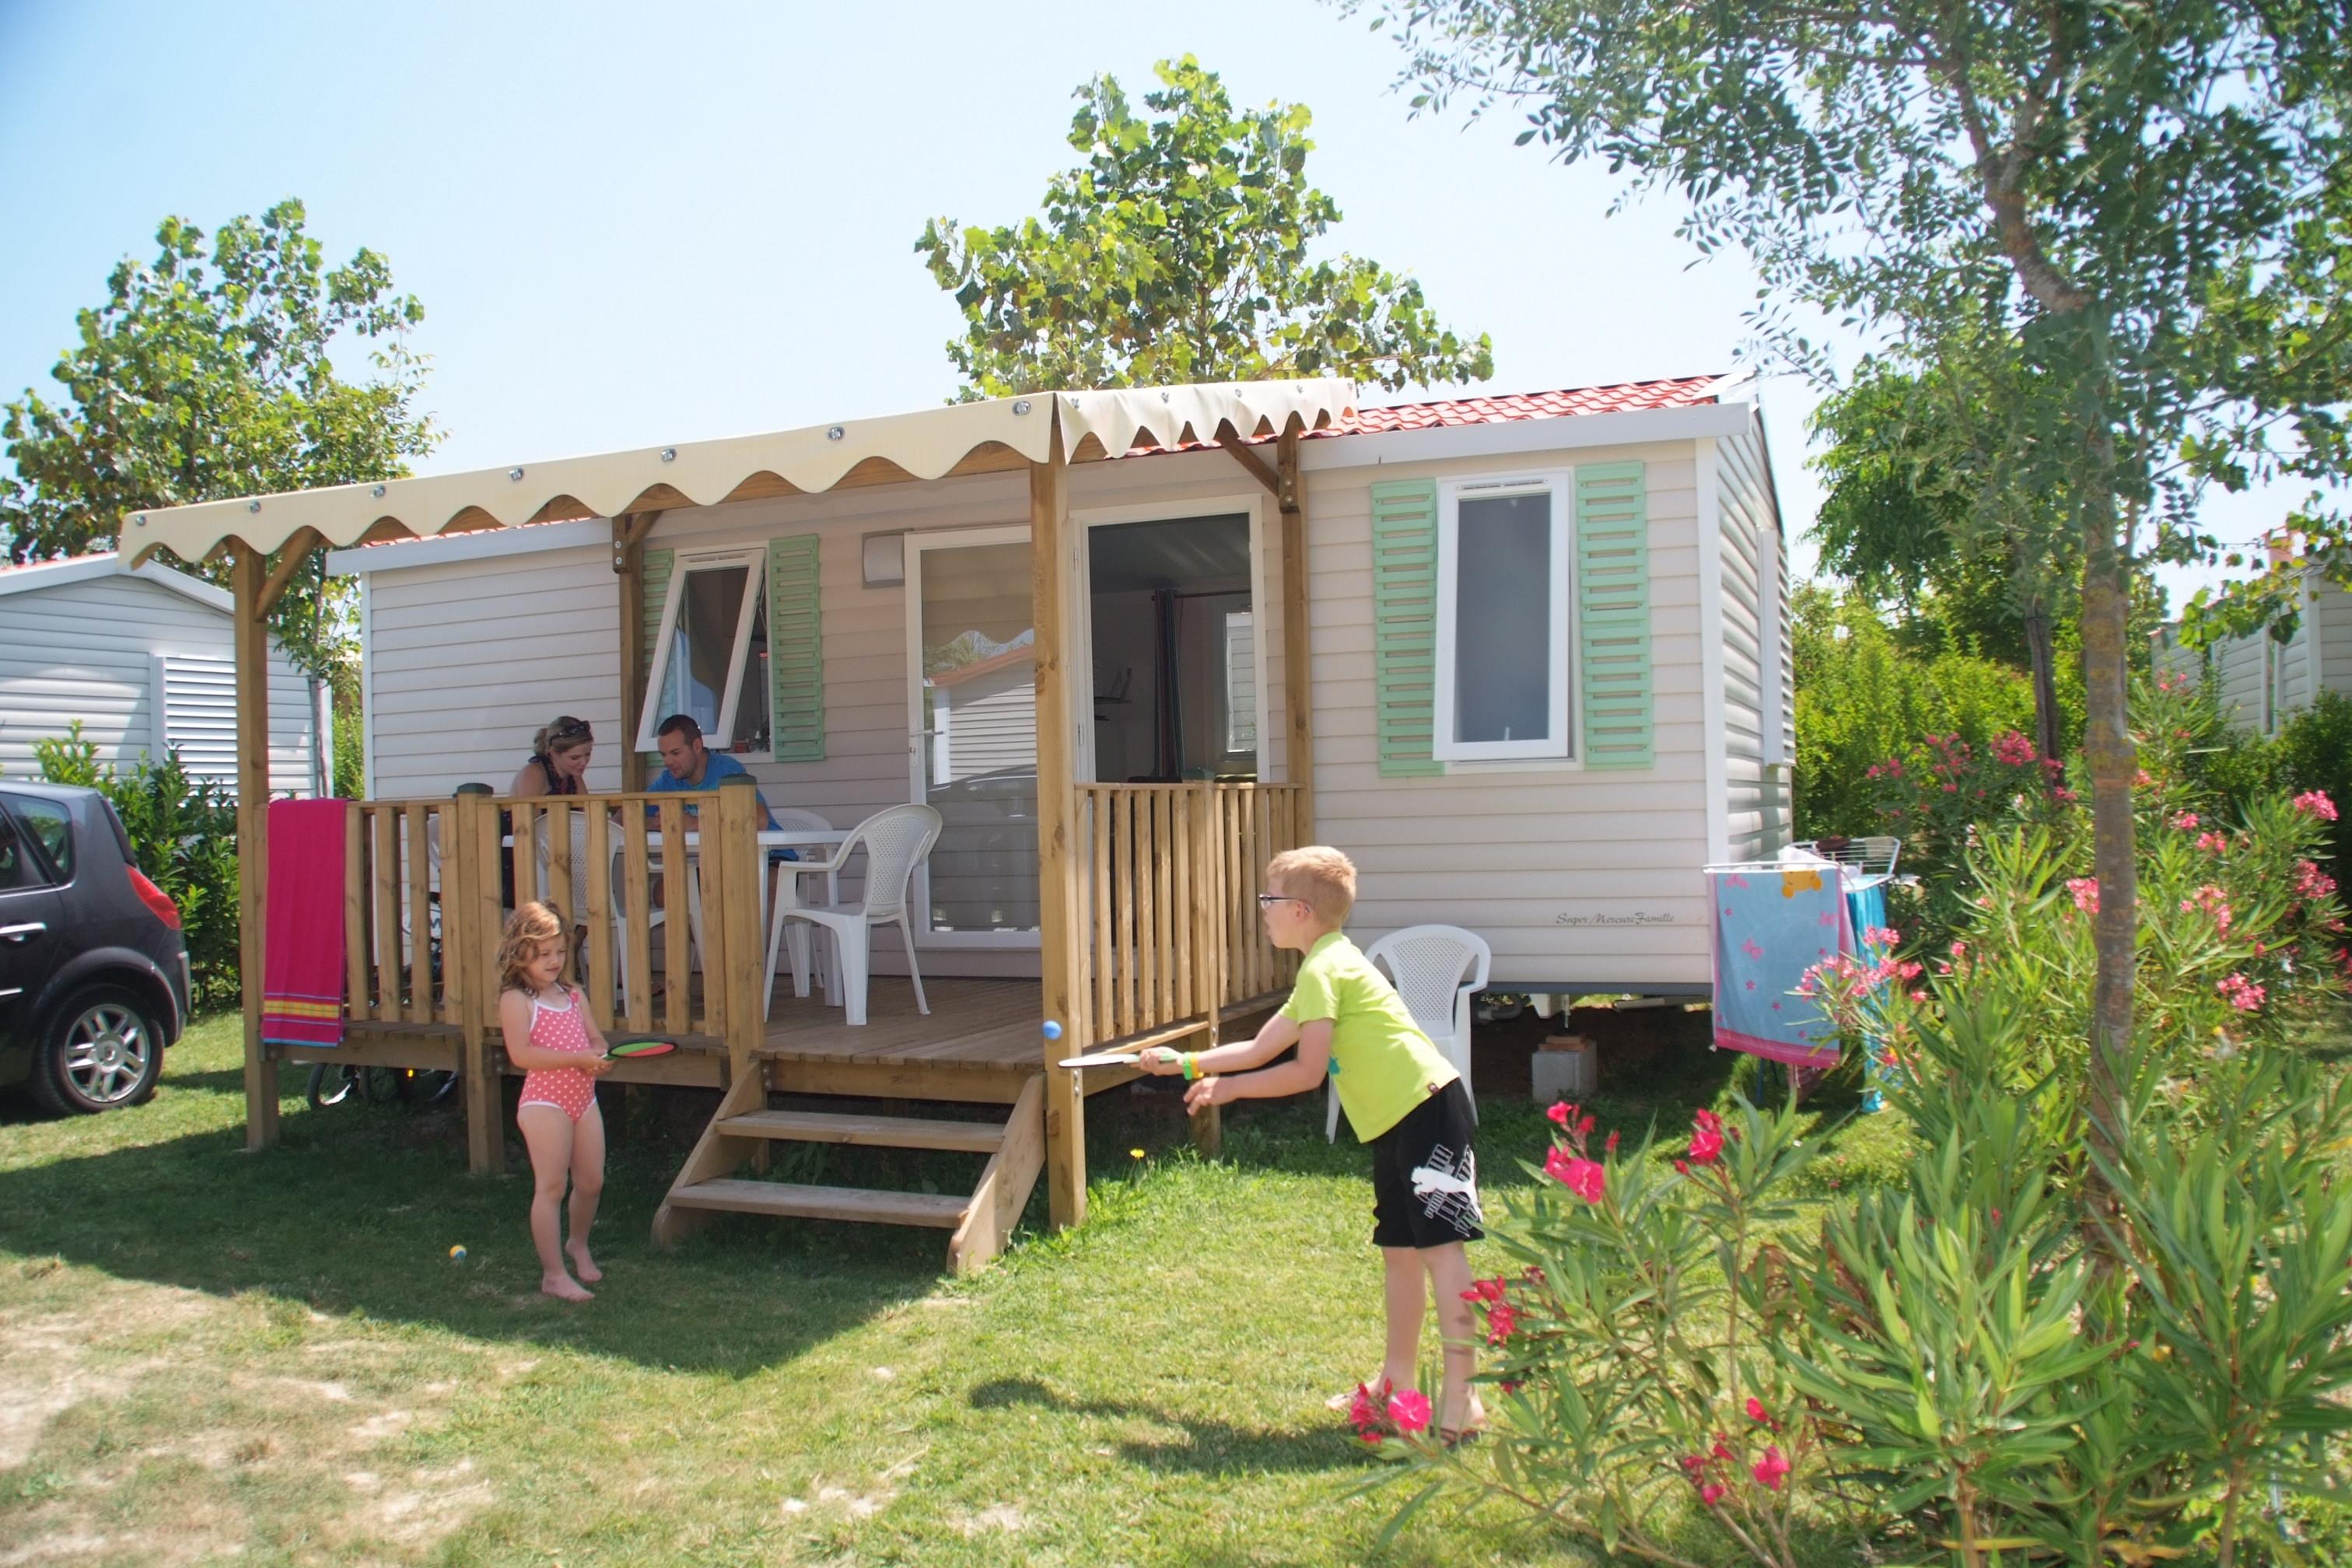 Accommodation - Mobile Home Fruité 2 Bedrooms / Super Mercure Family (Year 2012)/Air-Conditioning - Camping Le Soleil Fruité